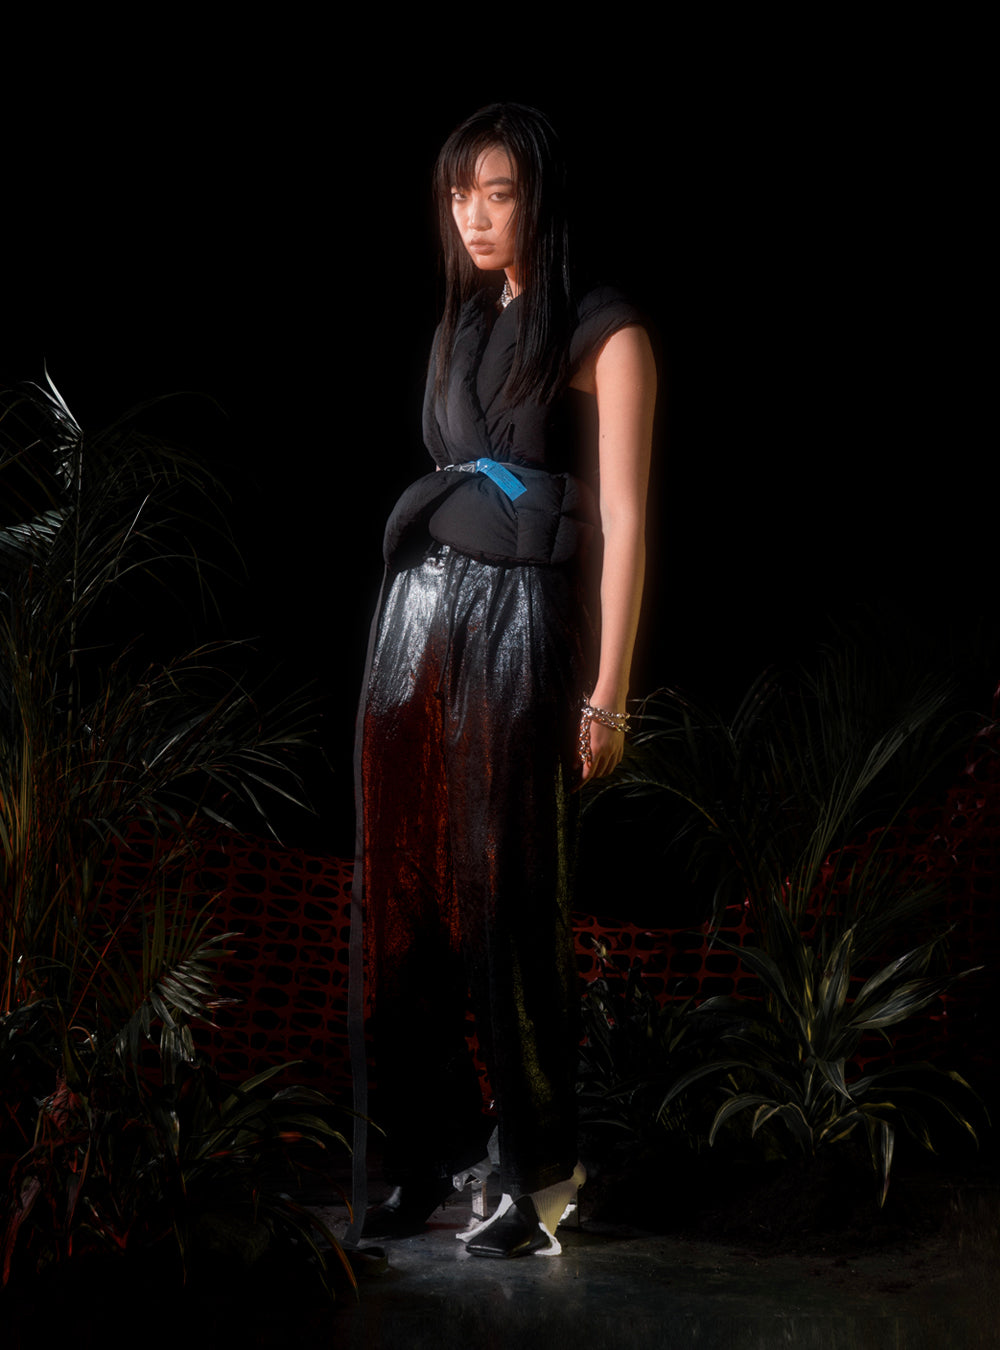 A woman in a black outfit standing in front of plants wearing the MIDNIGHTFACTORY Burnt pearls with paper-clip necklace/bracelet.